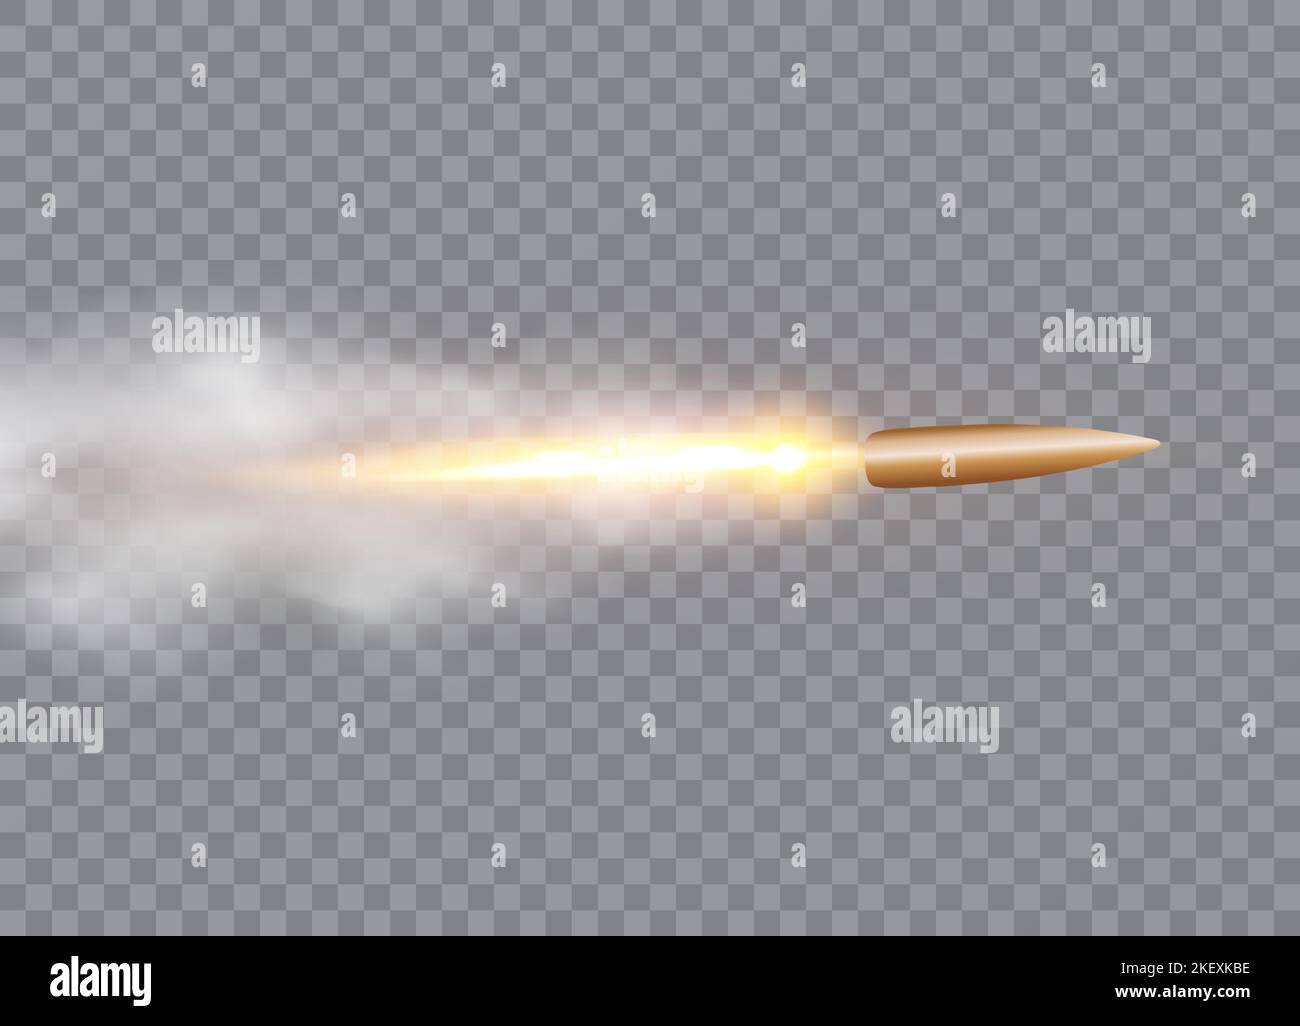 Realistic flying bullet in motion with the fiery trace. Vector illustration. Stock Vector